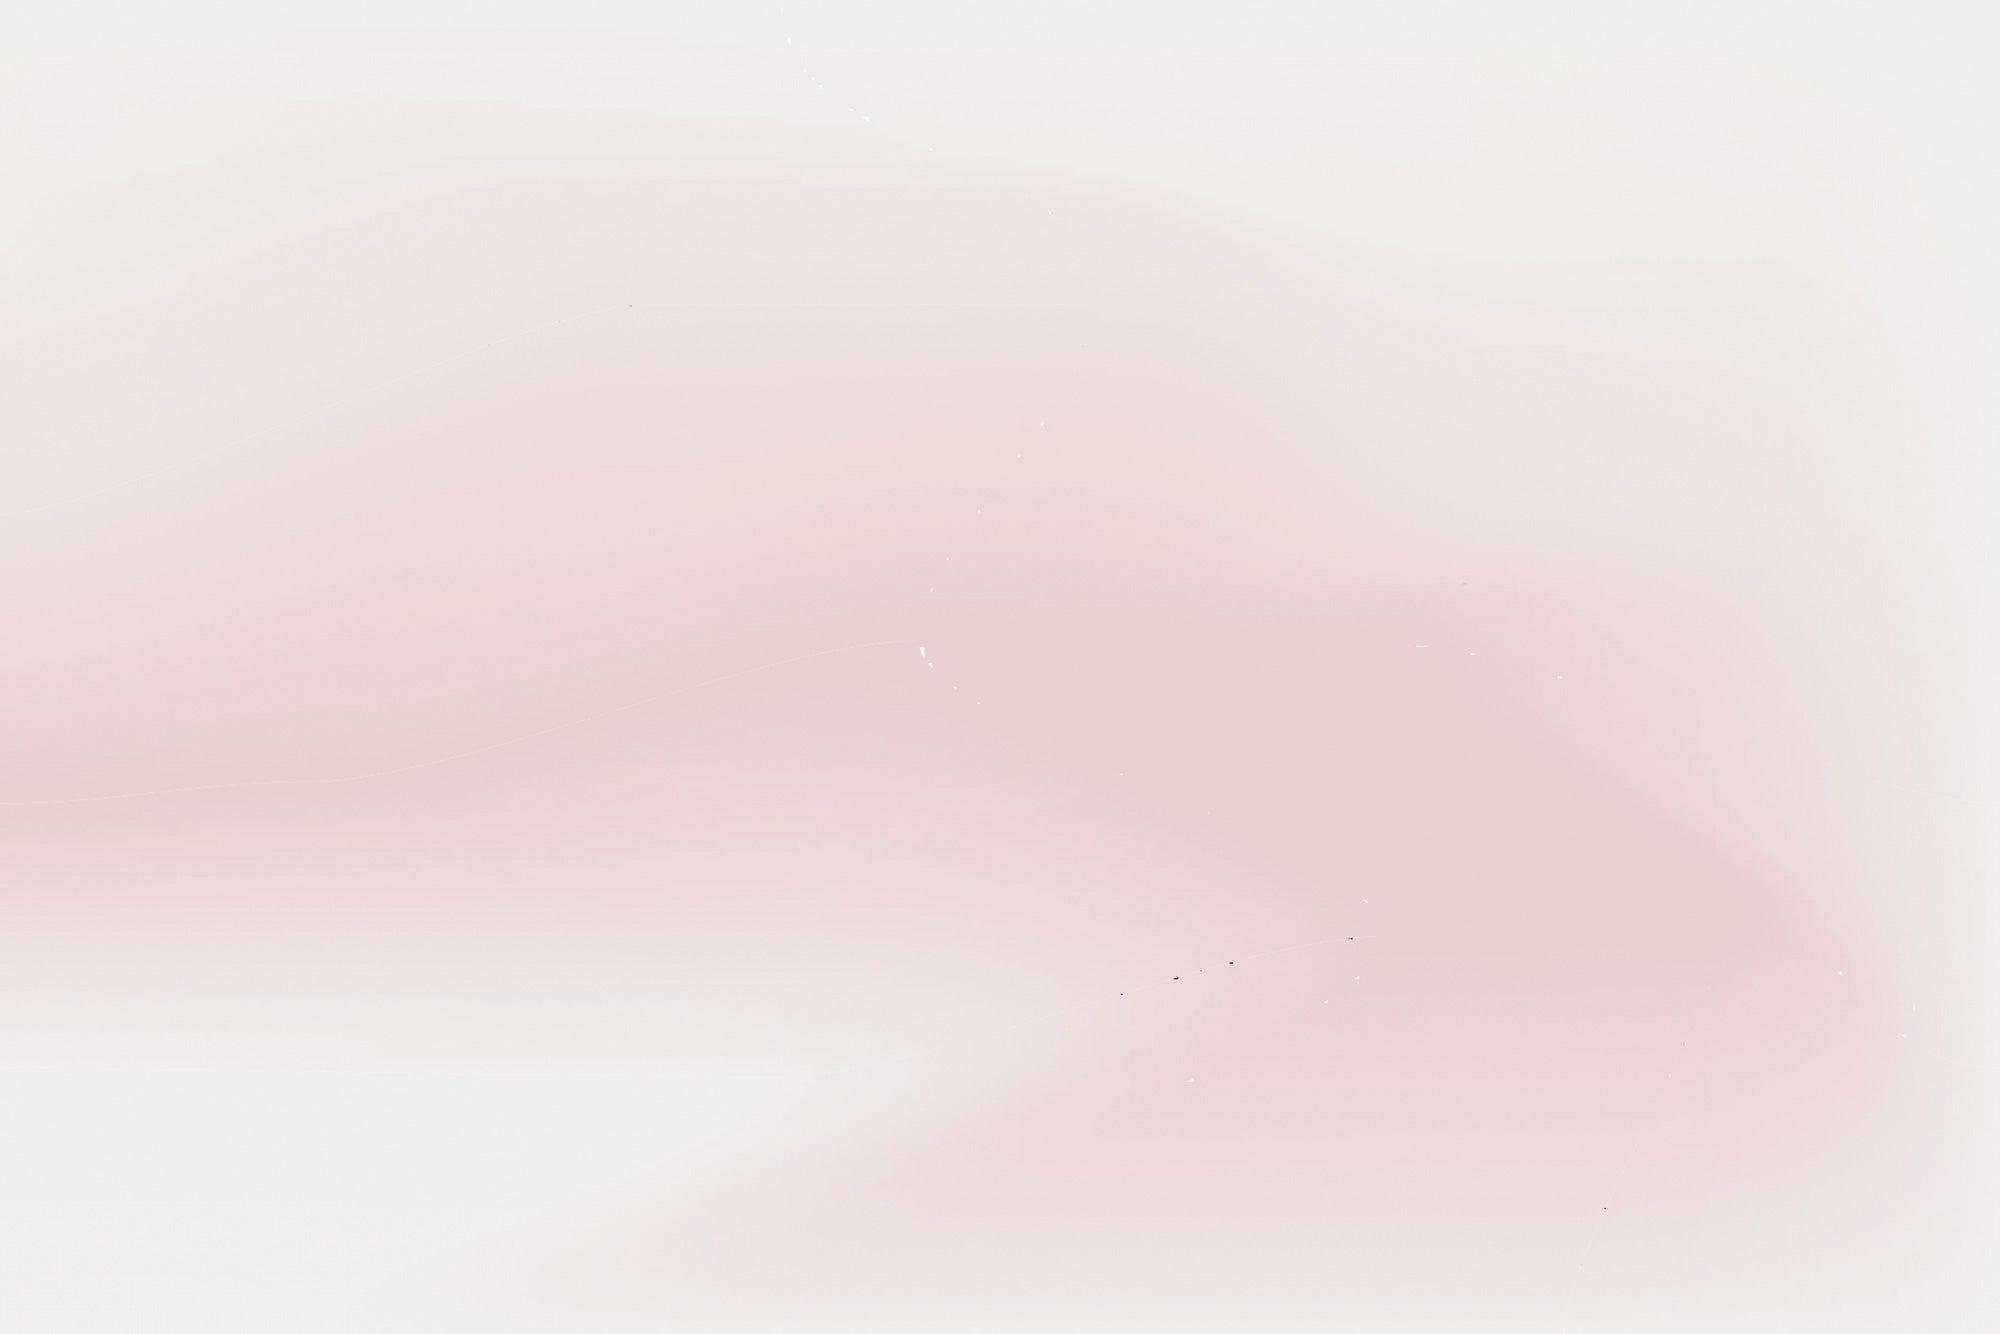 Soft Pink Gradient #2 Wall Mural